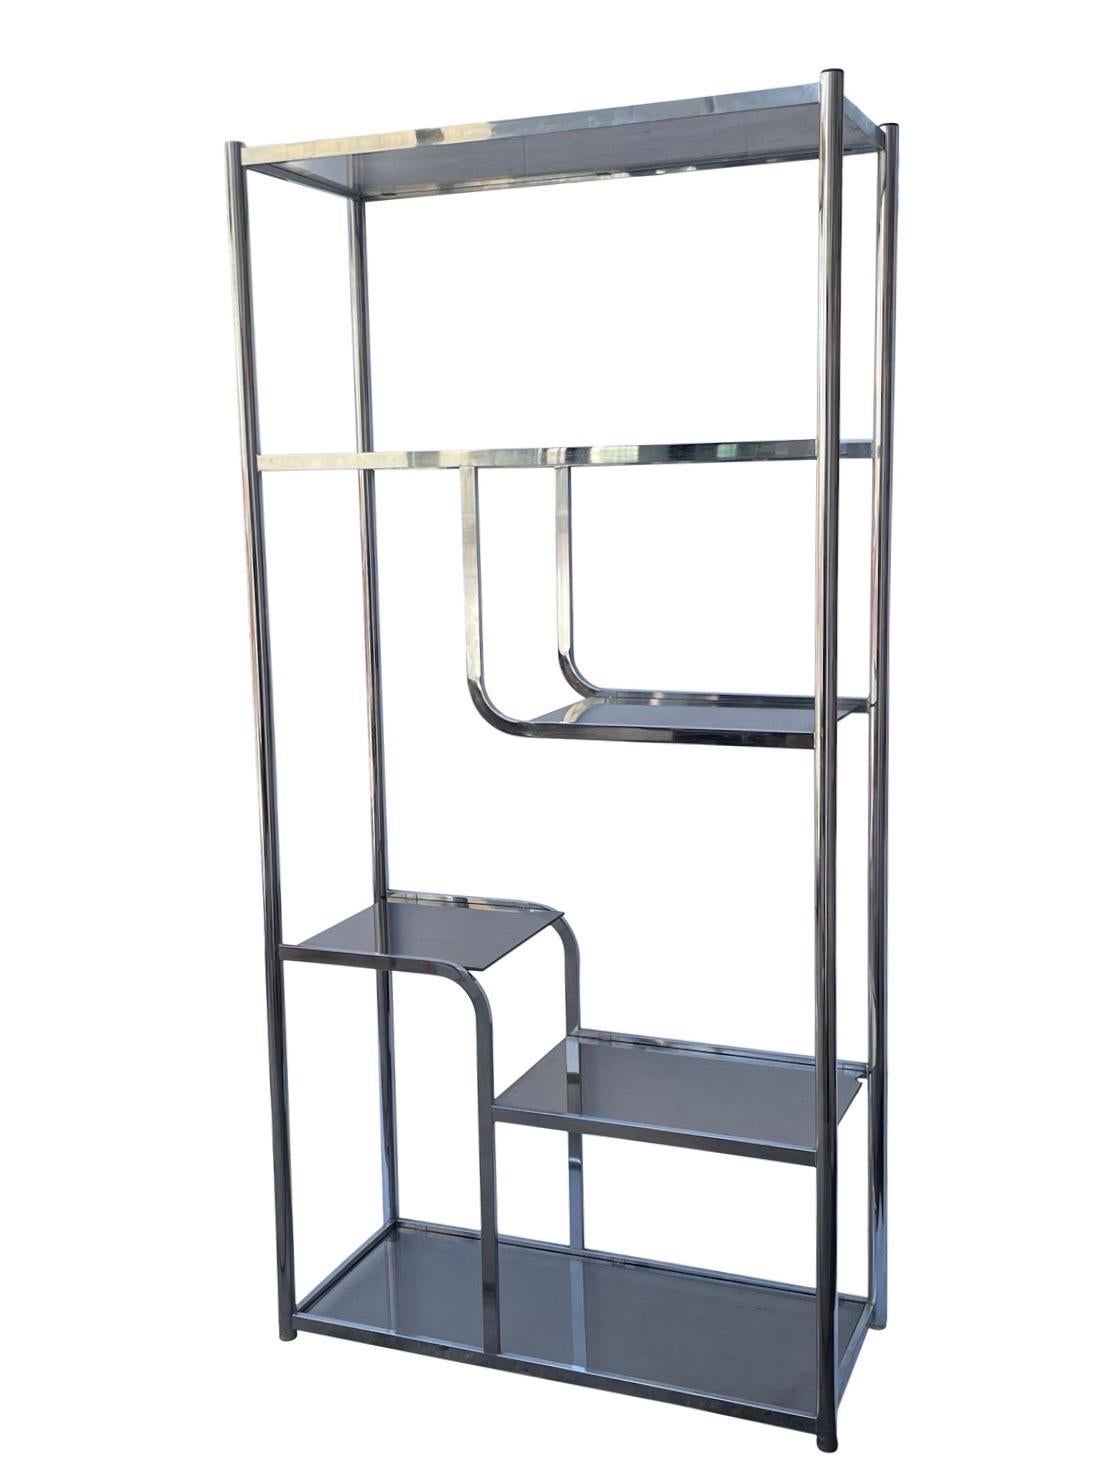 American 1970s Geometrical Chrome Shelving Unit in the Manner of Milo Baughman For Sale